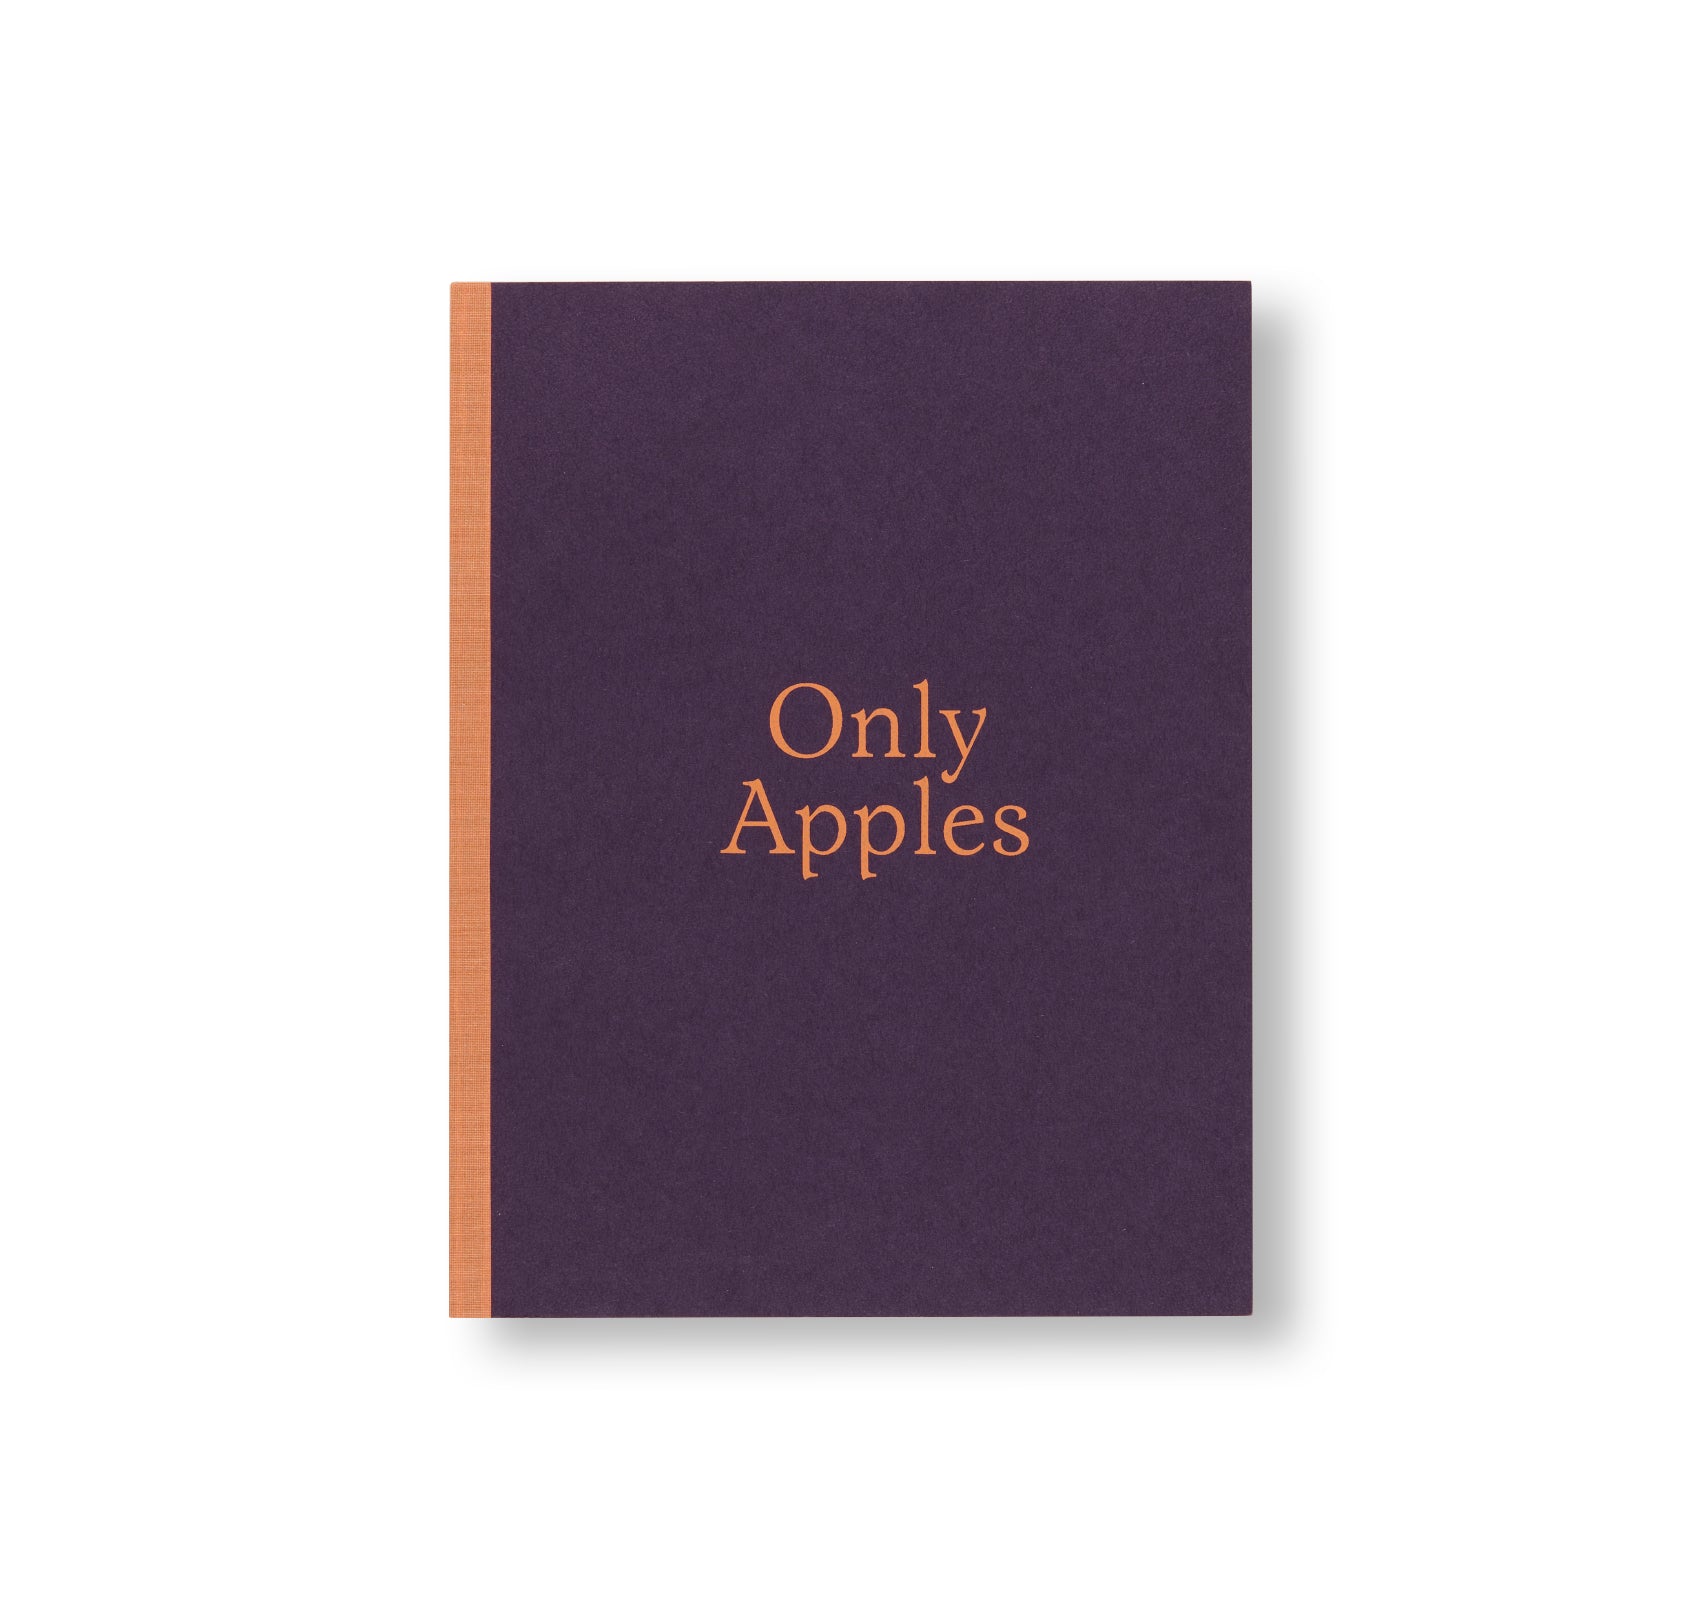 ONLY APPLES by Brigham Baker